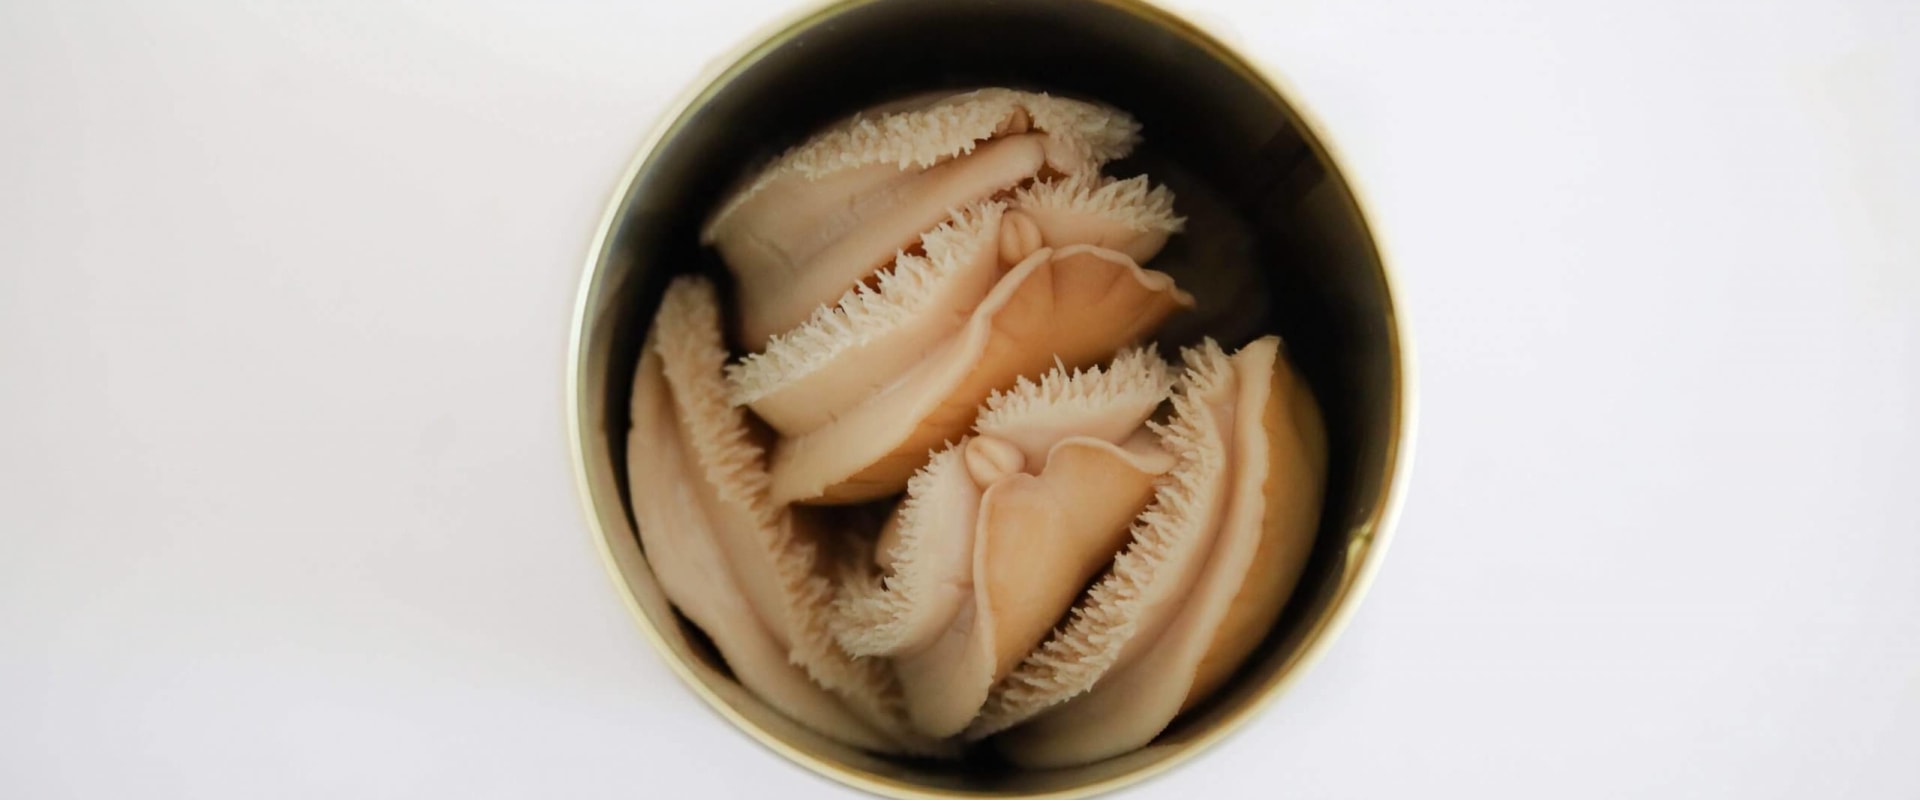 Where to buy canned abalone in cape town?